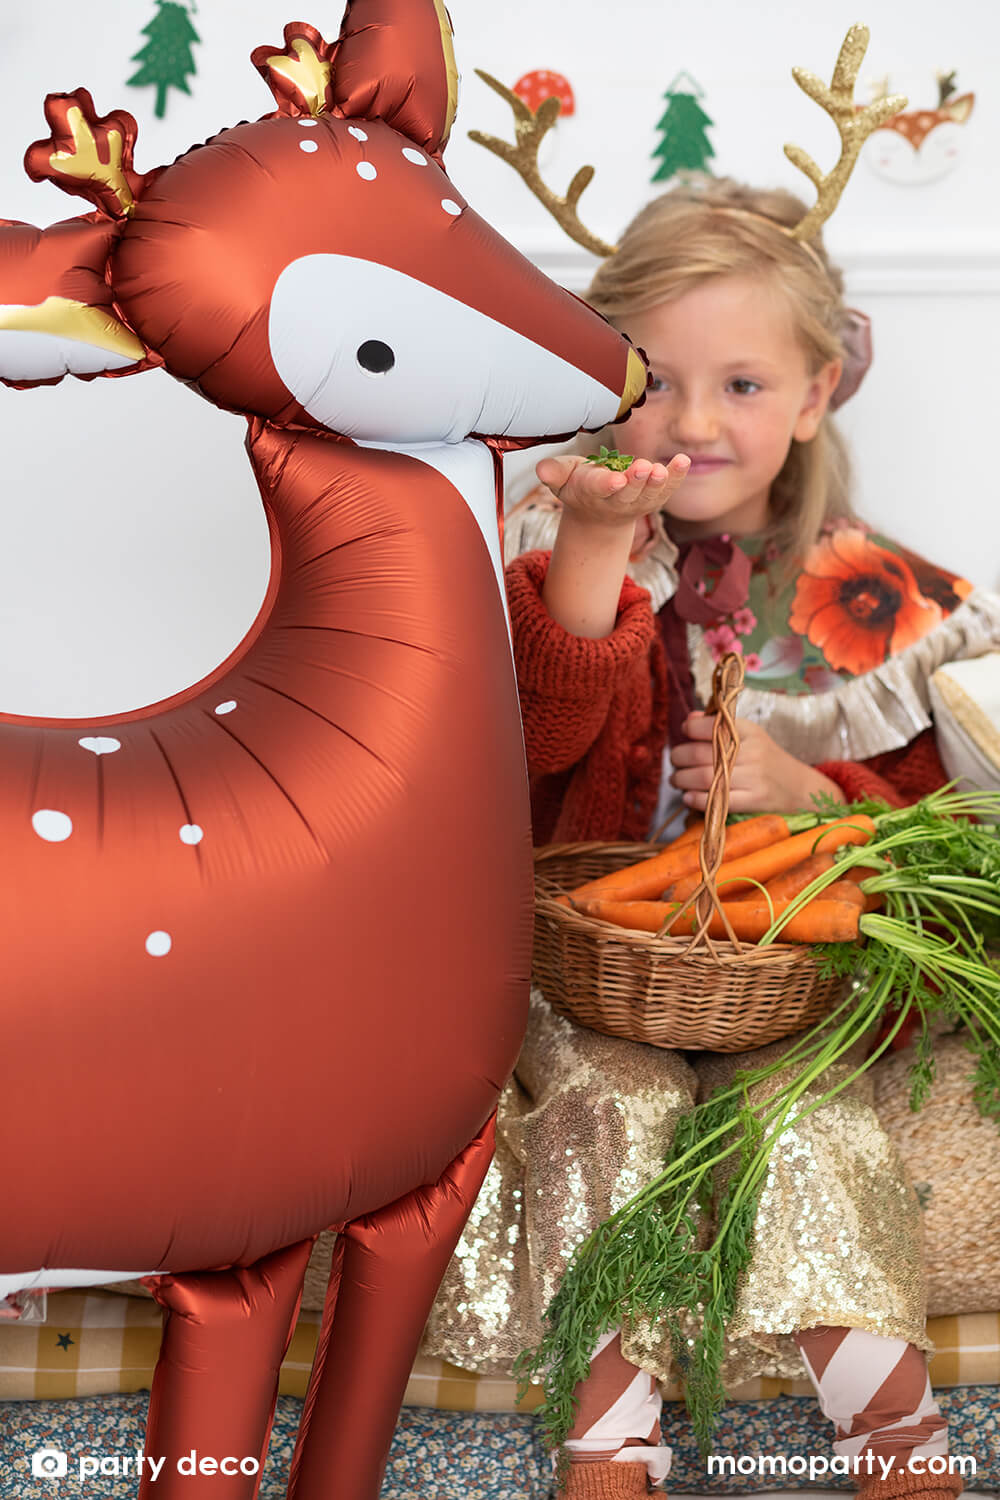 Christmas party fun with girl wearing a elope reindeer antlers headband, feeding a 40 inches large gorgeous deer shaped foil balloon in a modern room decorated with lots of holiday glitter garland, christmas tree and holiday themed foil balloons